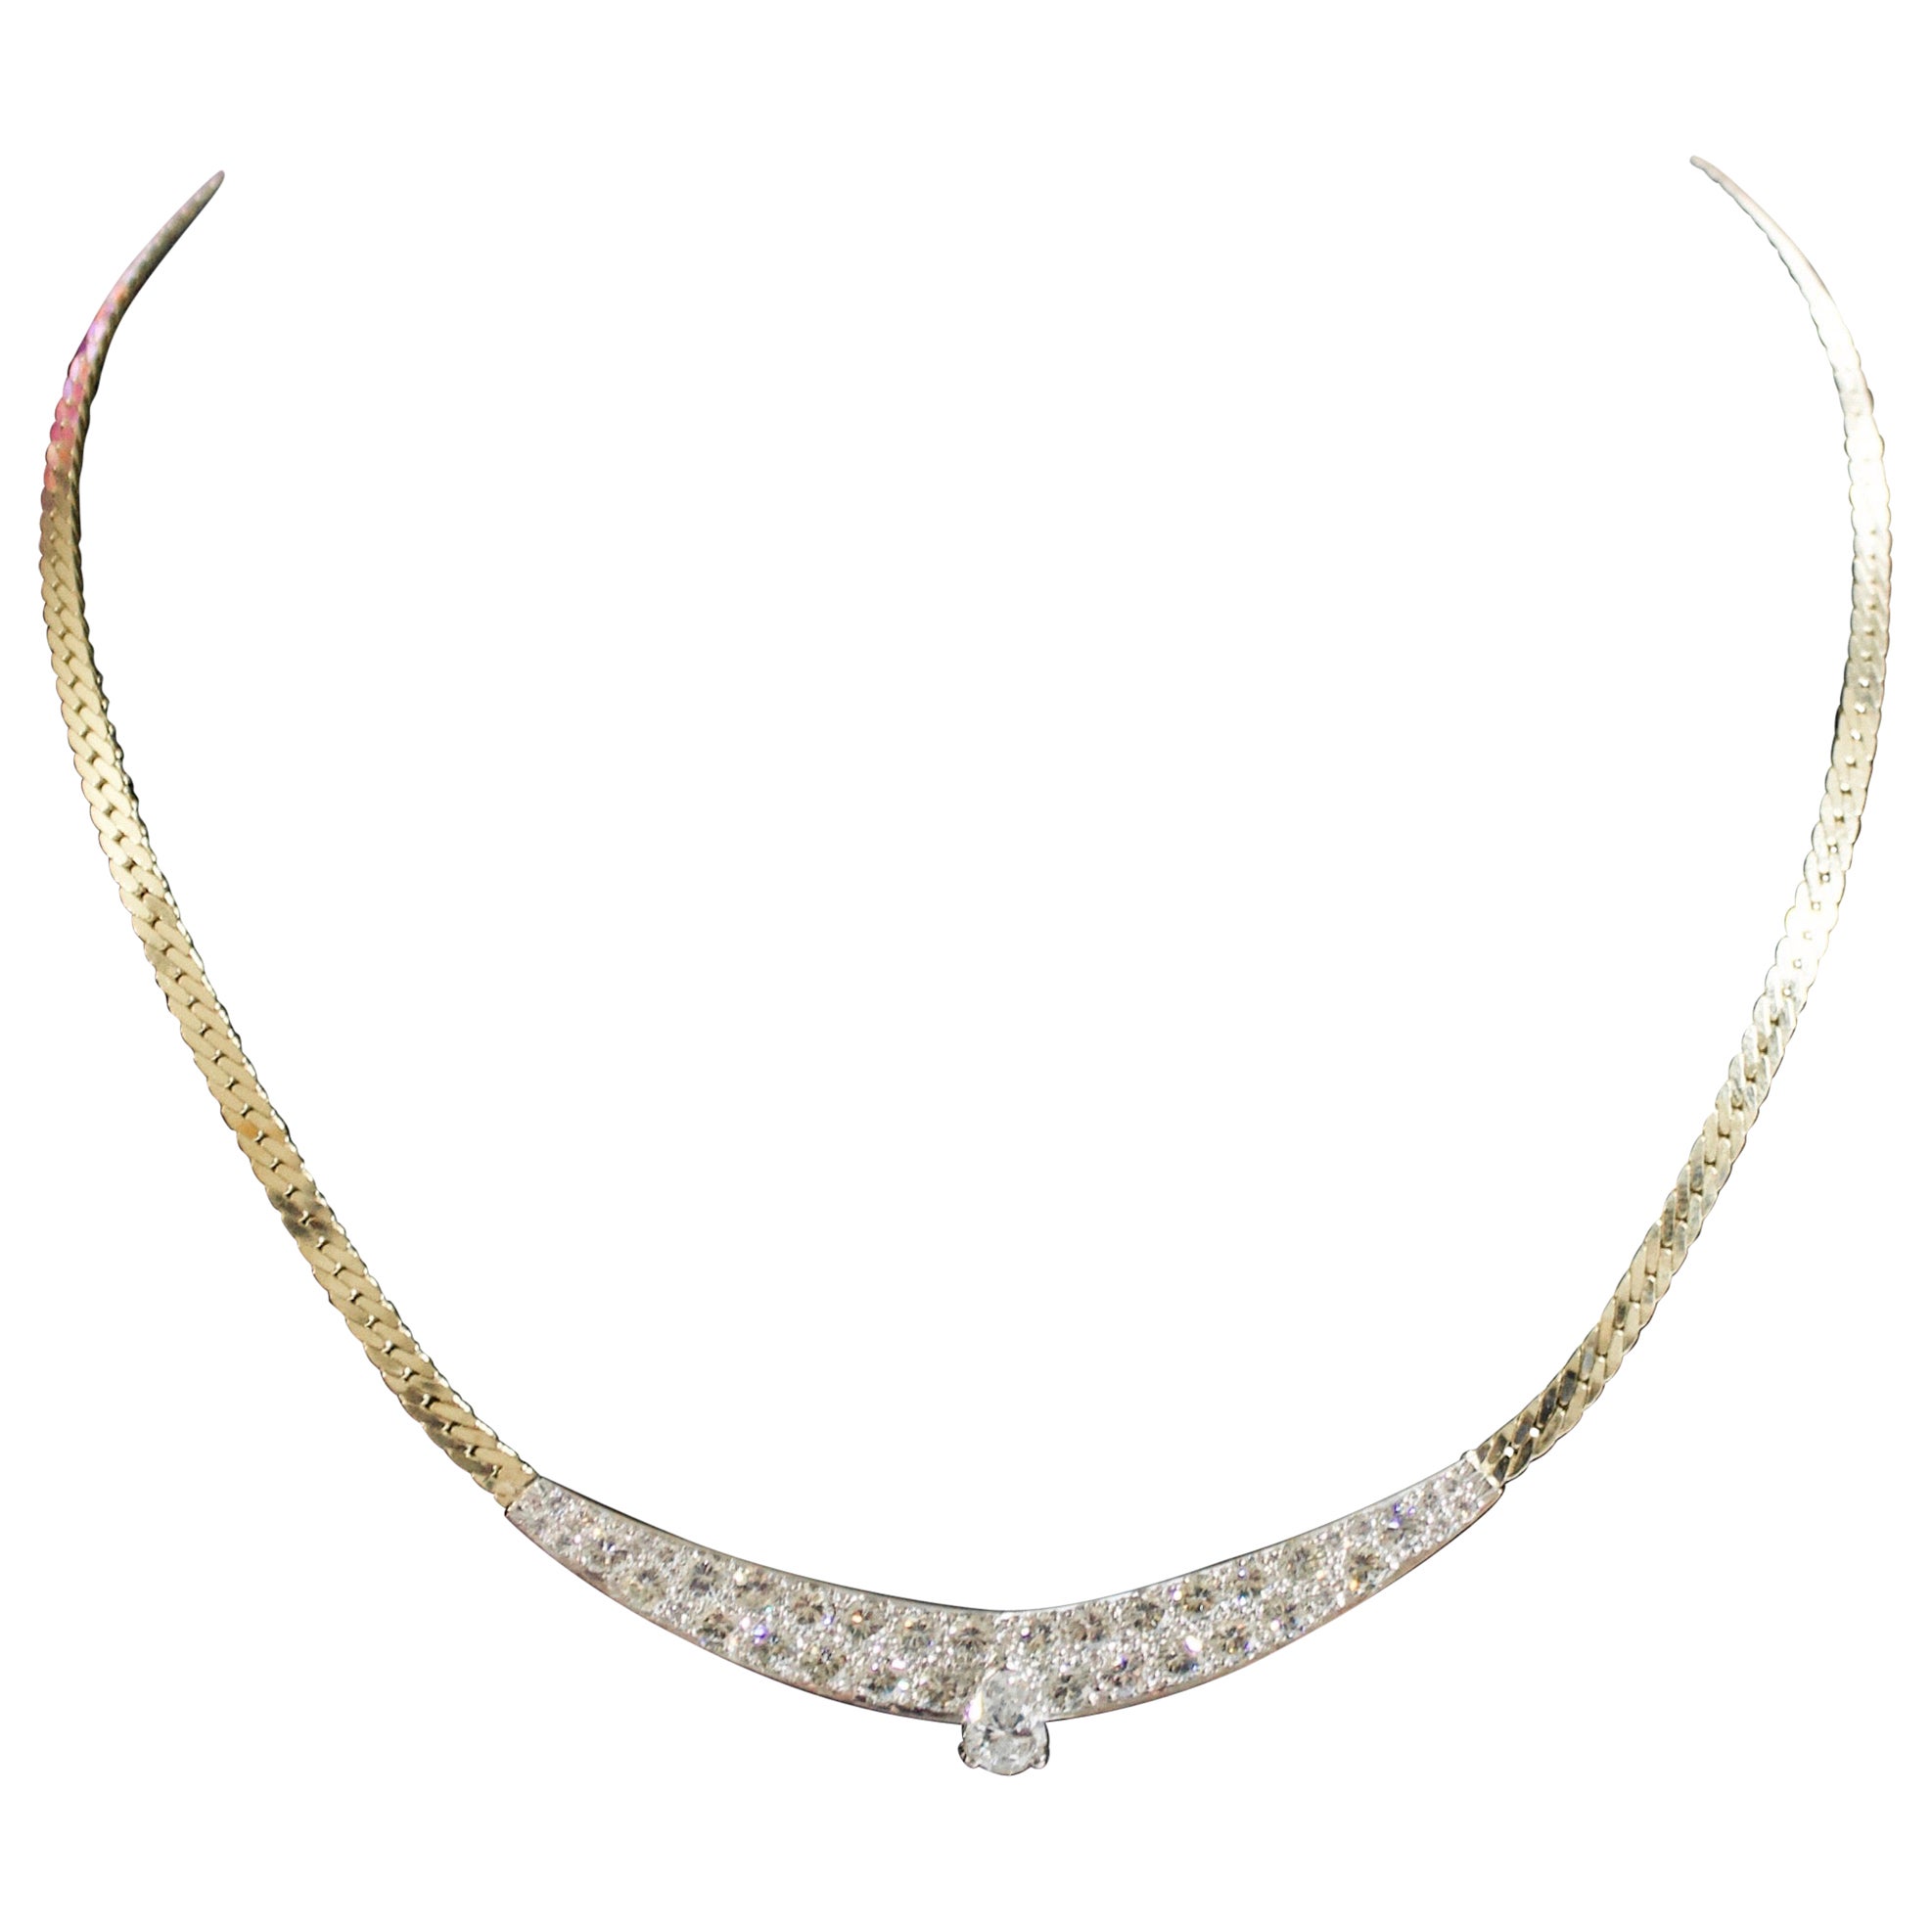 Classic Diamond Necklace in White and Yellow Gold Circa 1960's 3.55 Total Carats